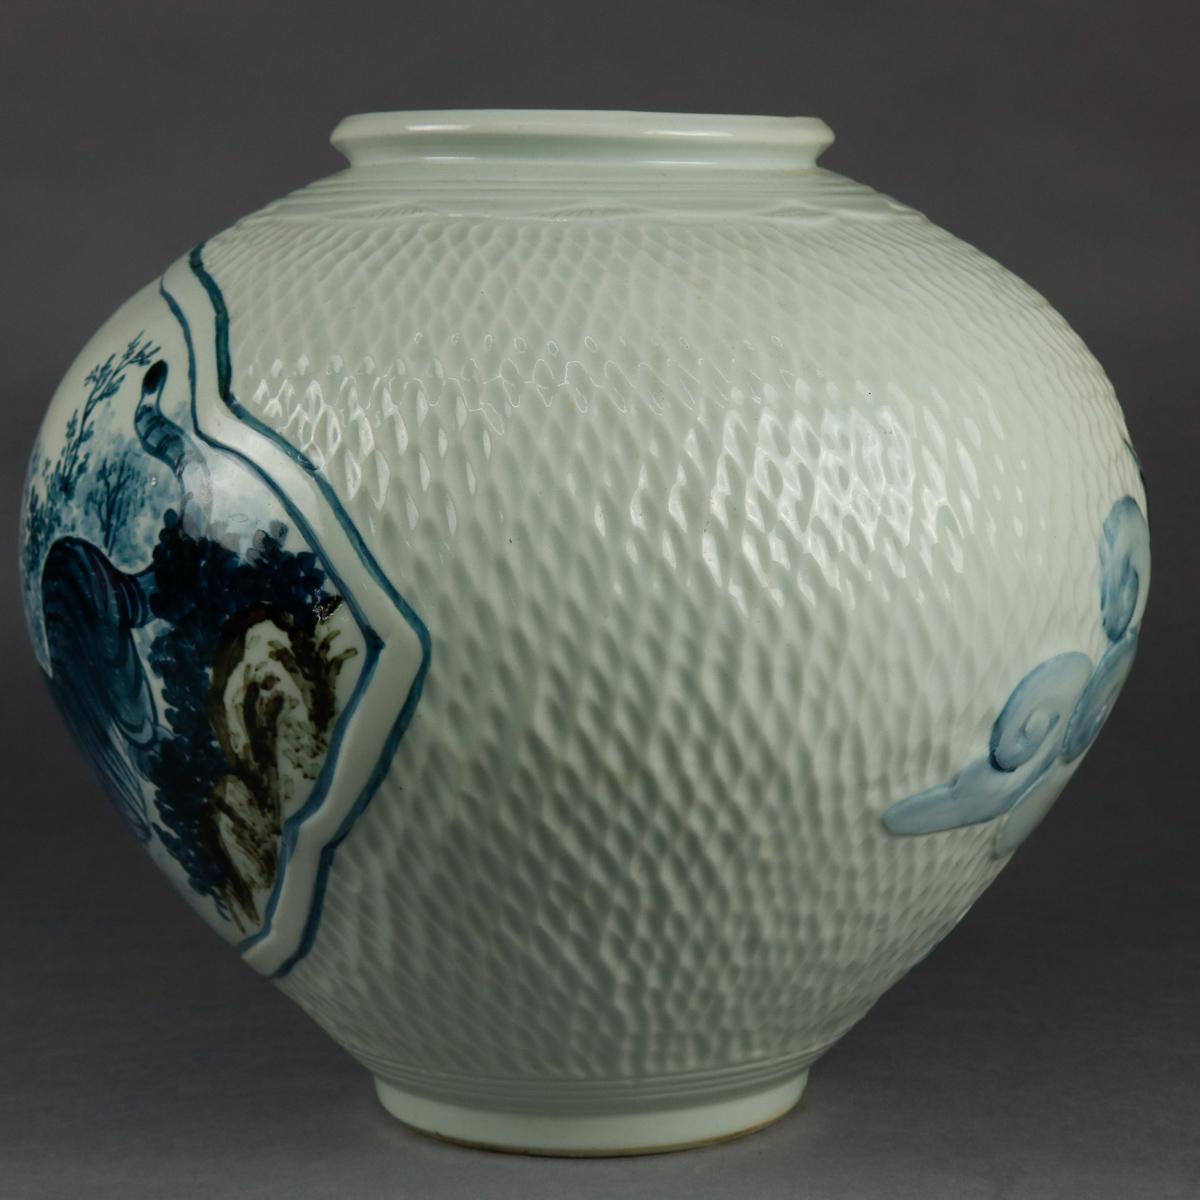 An oversized Chinese pottery vase offers bulbous form with all-over dimple texturing, reserve with hand painted tiger scene, high relief stylized clouds and in-flight heron, chop mark verbiage and signature as photographed, 20th century

Measures: